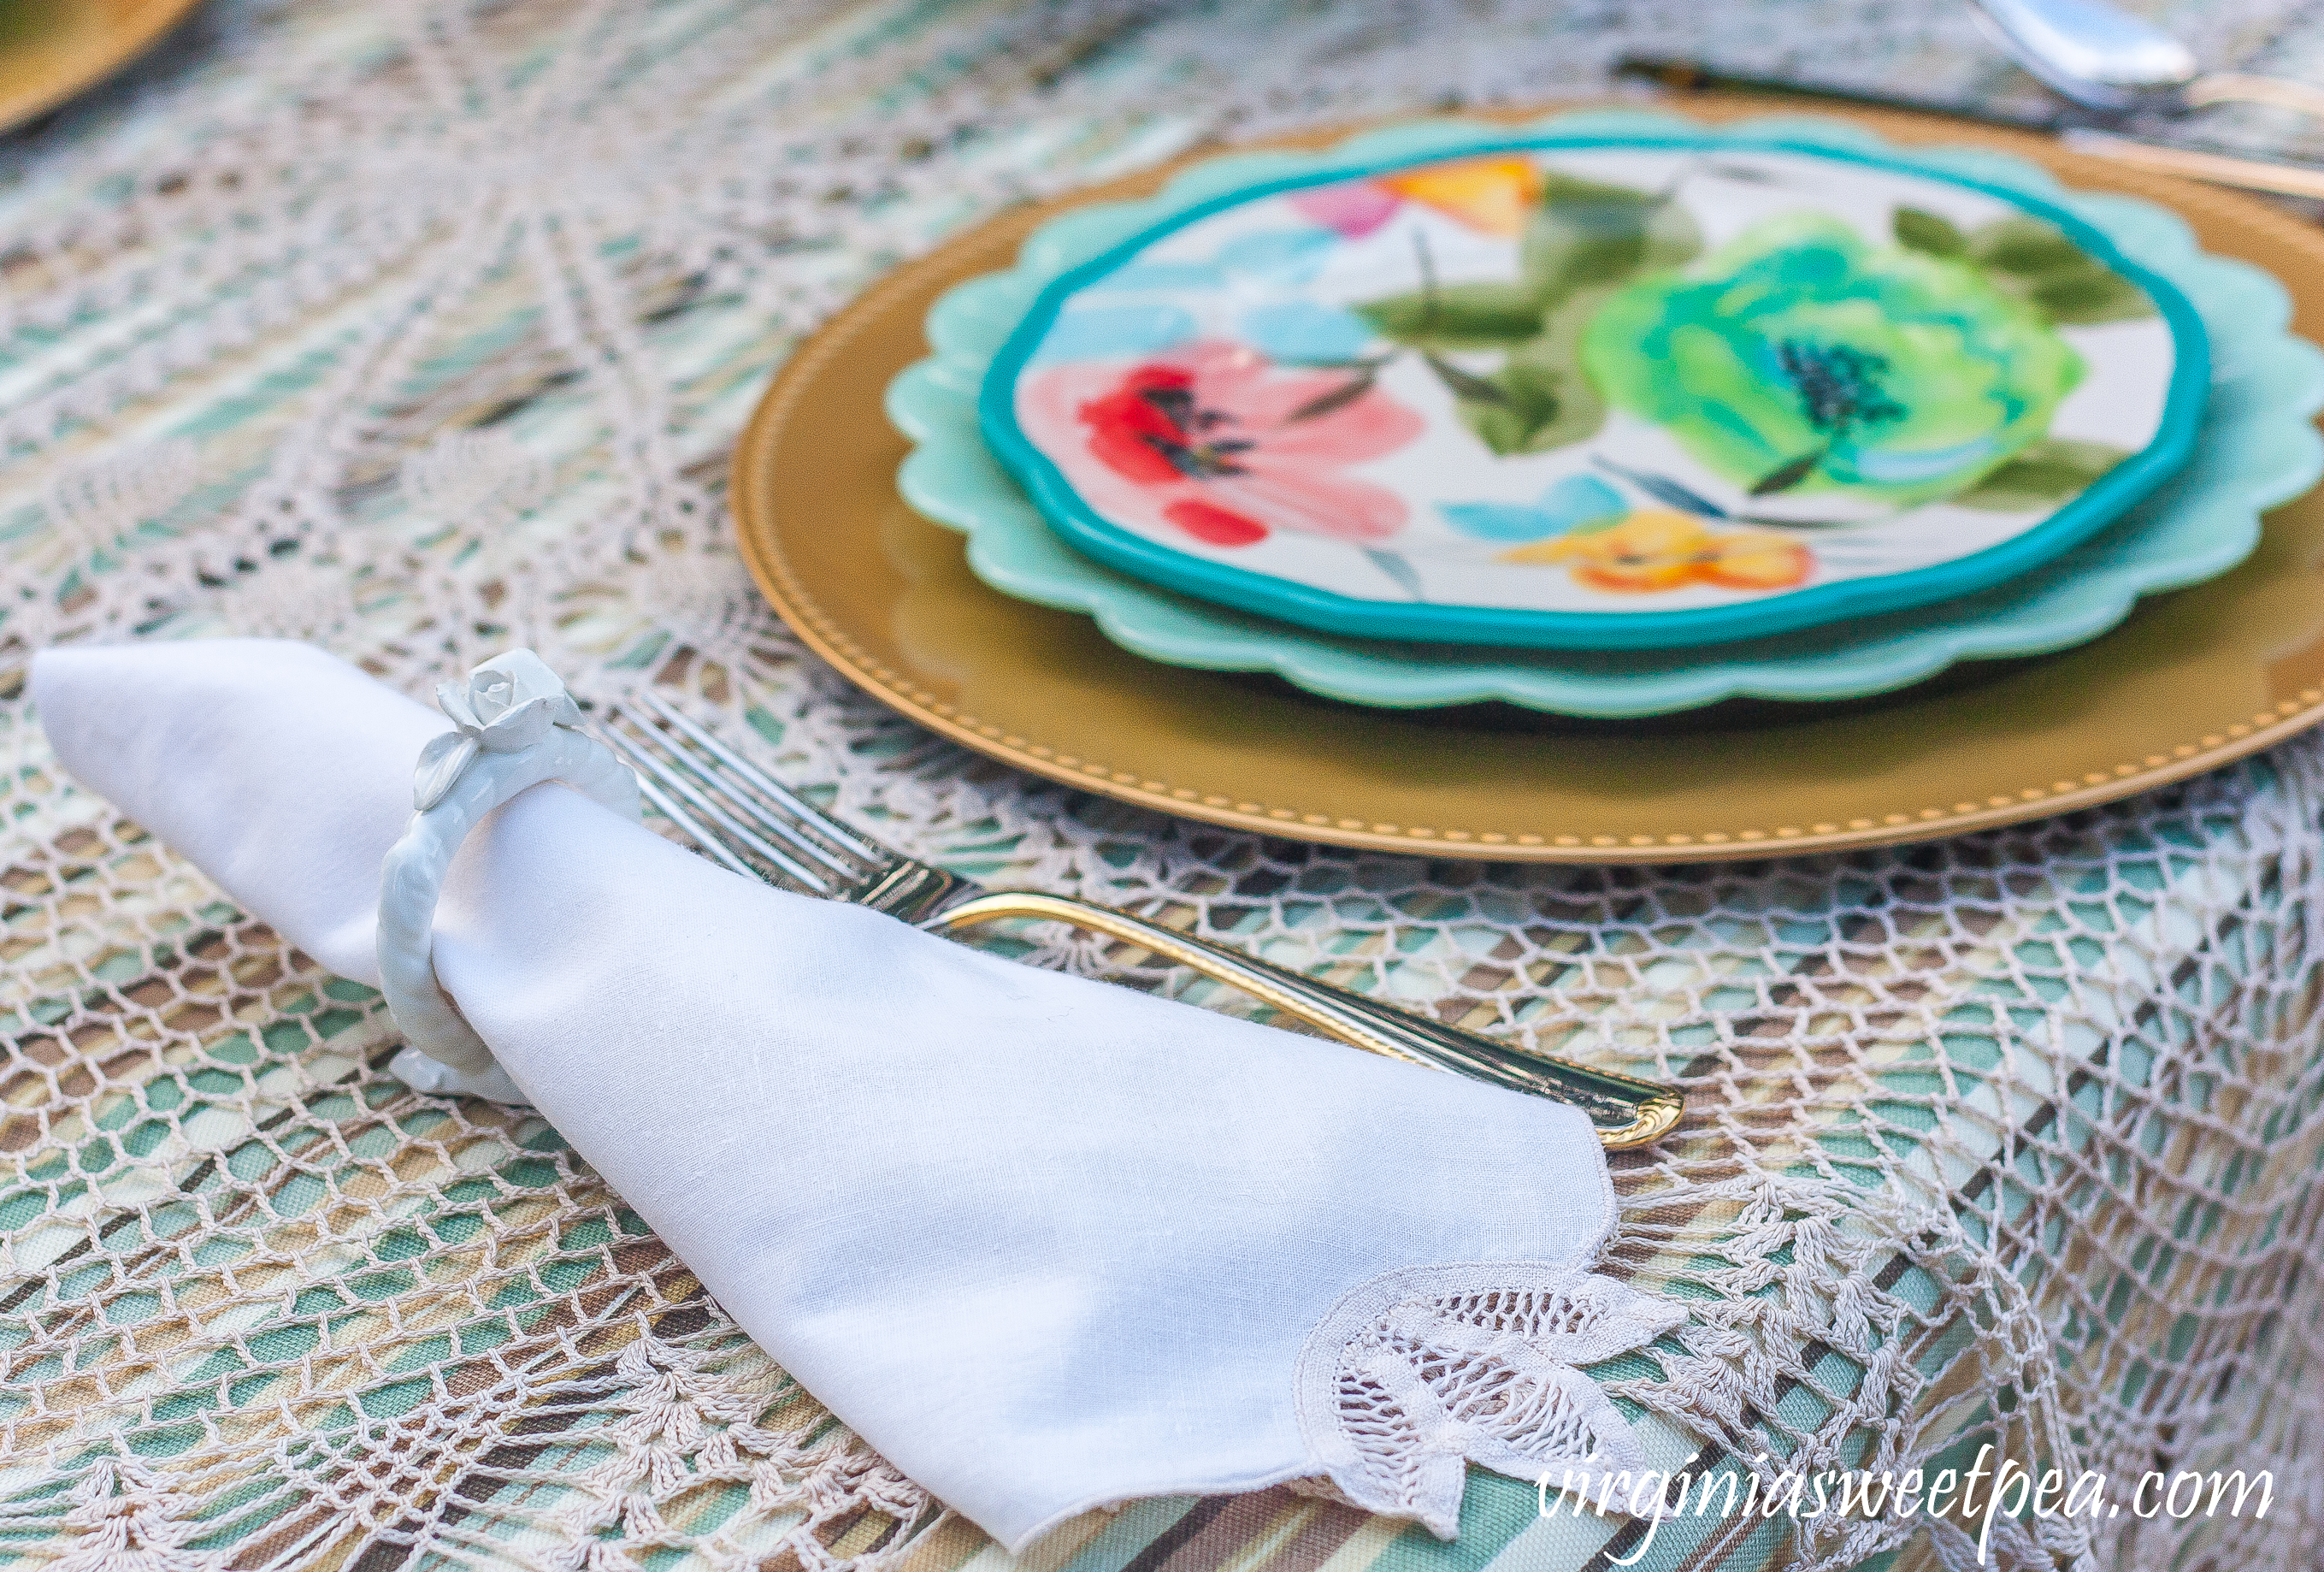 Table setting with Pioneer Woman dishes and Gorham Golden Ribbon Edge flatware.